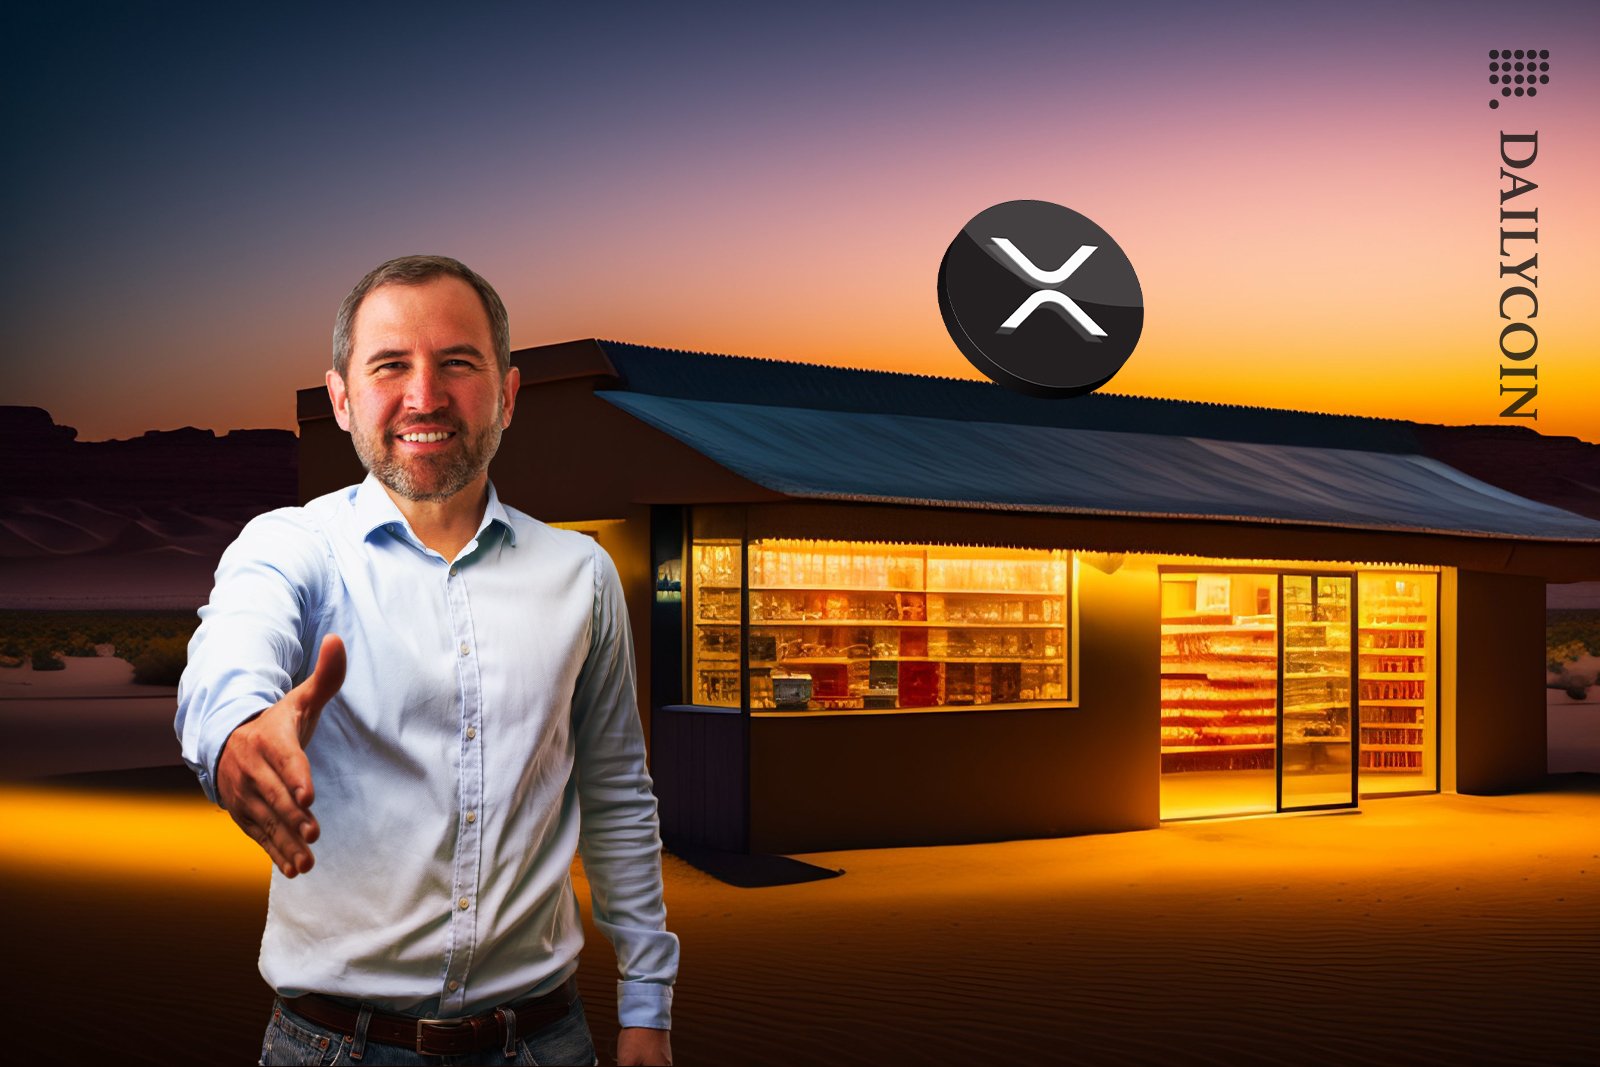 Brad Garlinghouse offering a deal in front of a small house with a small XRP logo on top of it.